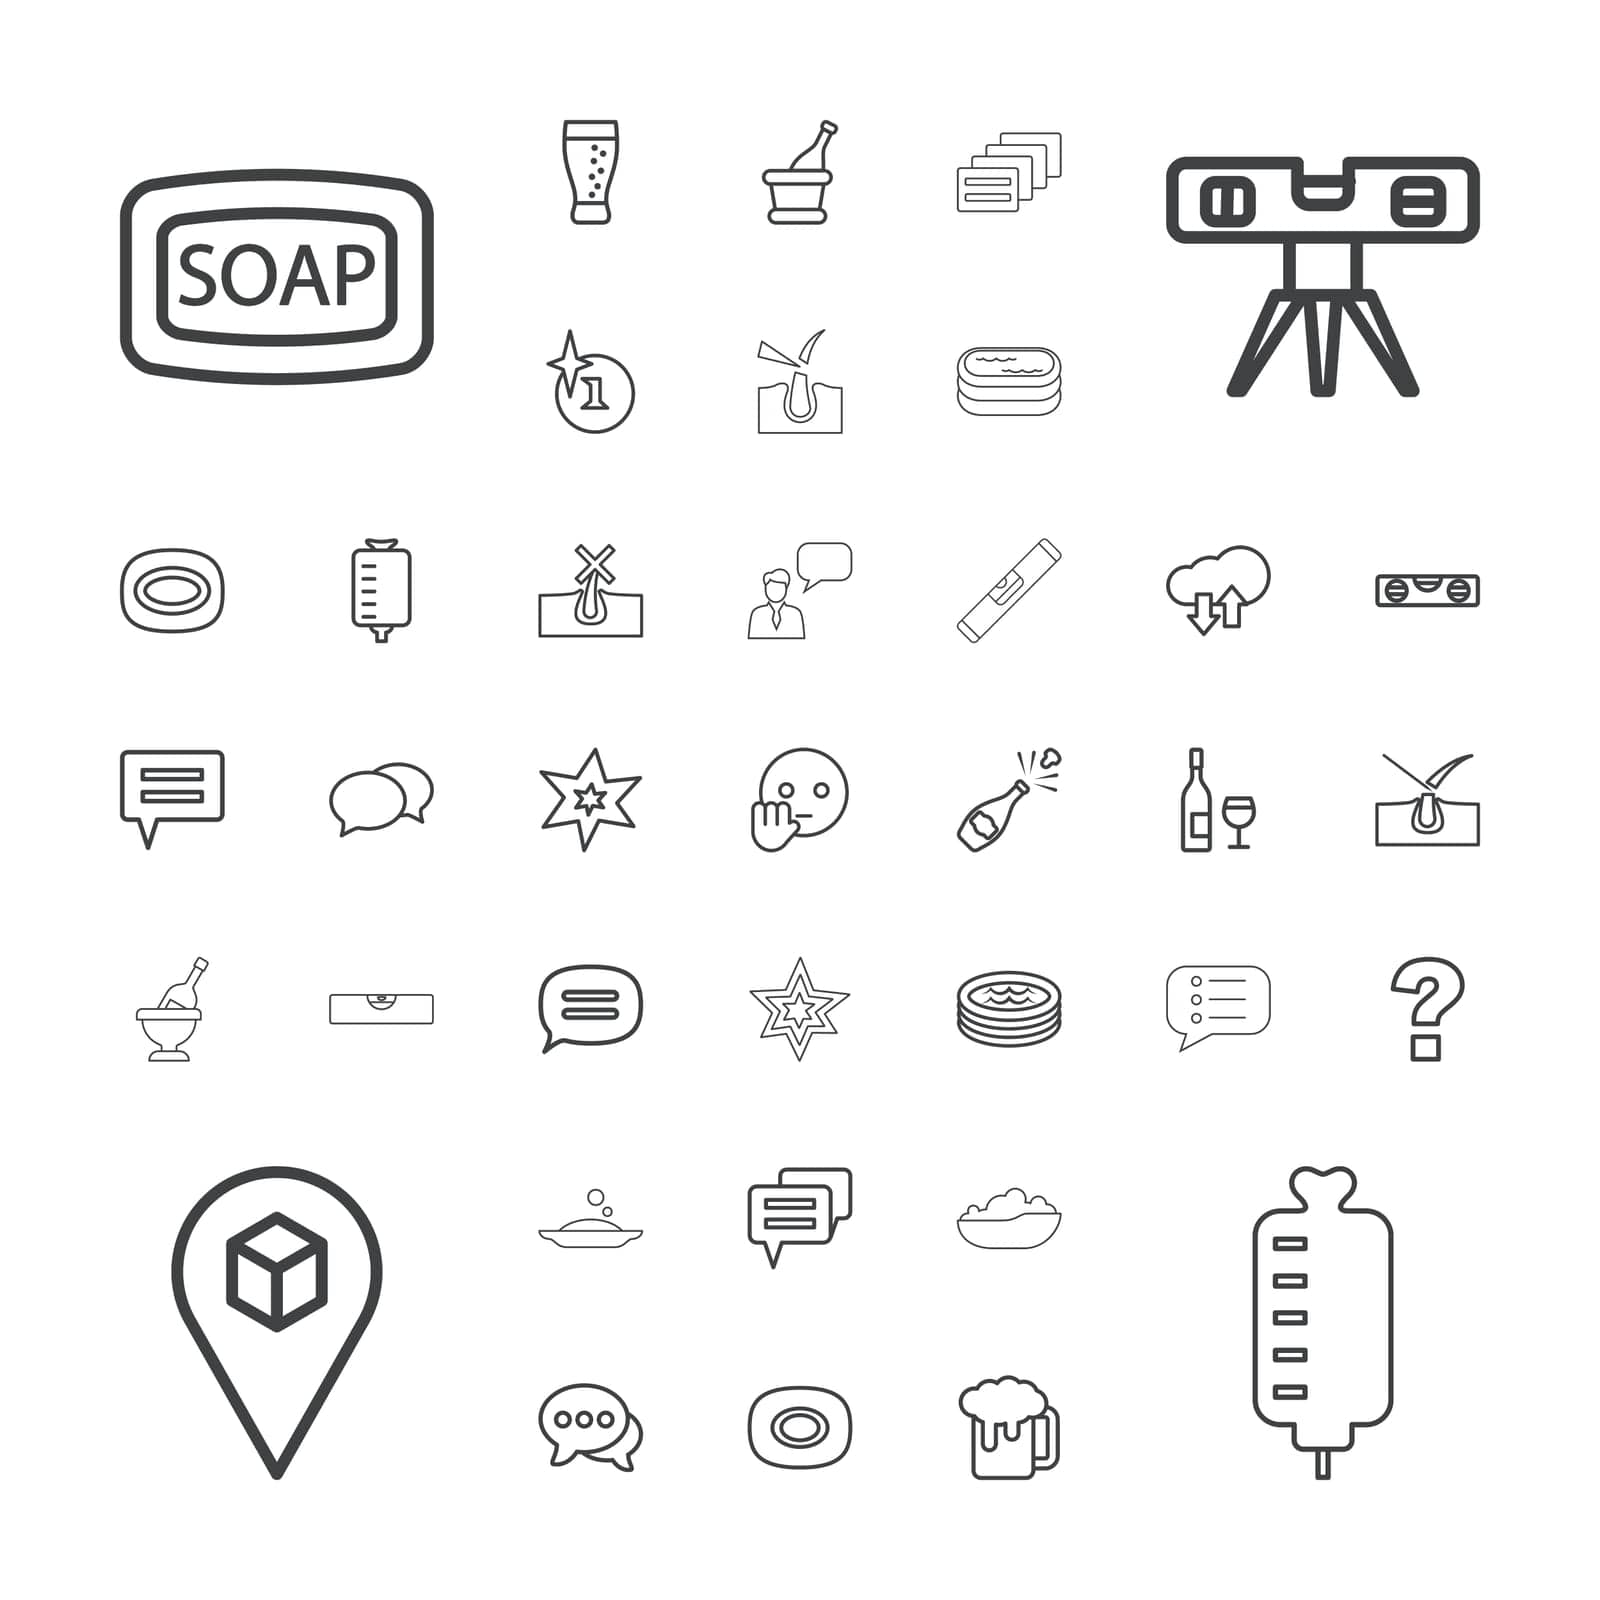 drop,no,upload,icon,skin,for,bottle,ruler,cloud,hair,download,bubble,web,and,champagne,vector,man,shave,glass,emot,set,question,jacuzzi,level,in,mobile,counter,message,soda,bubblle,bye,explosion,with,chat,baby,wine,soap by ogqcorp